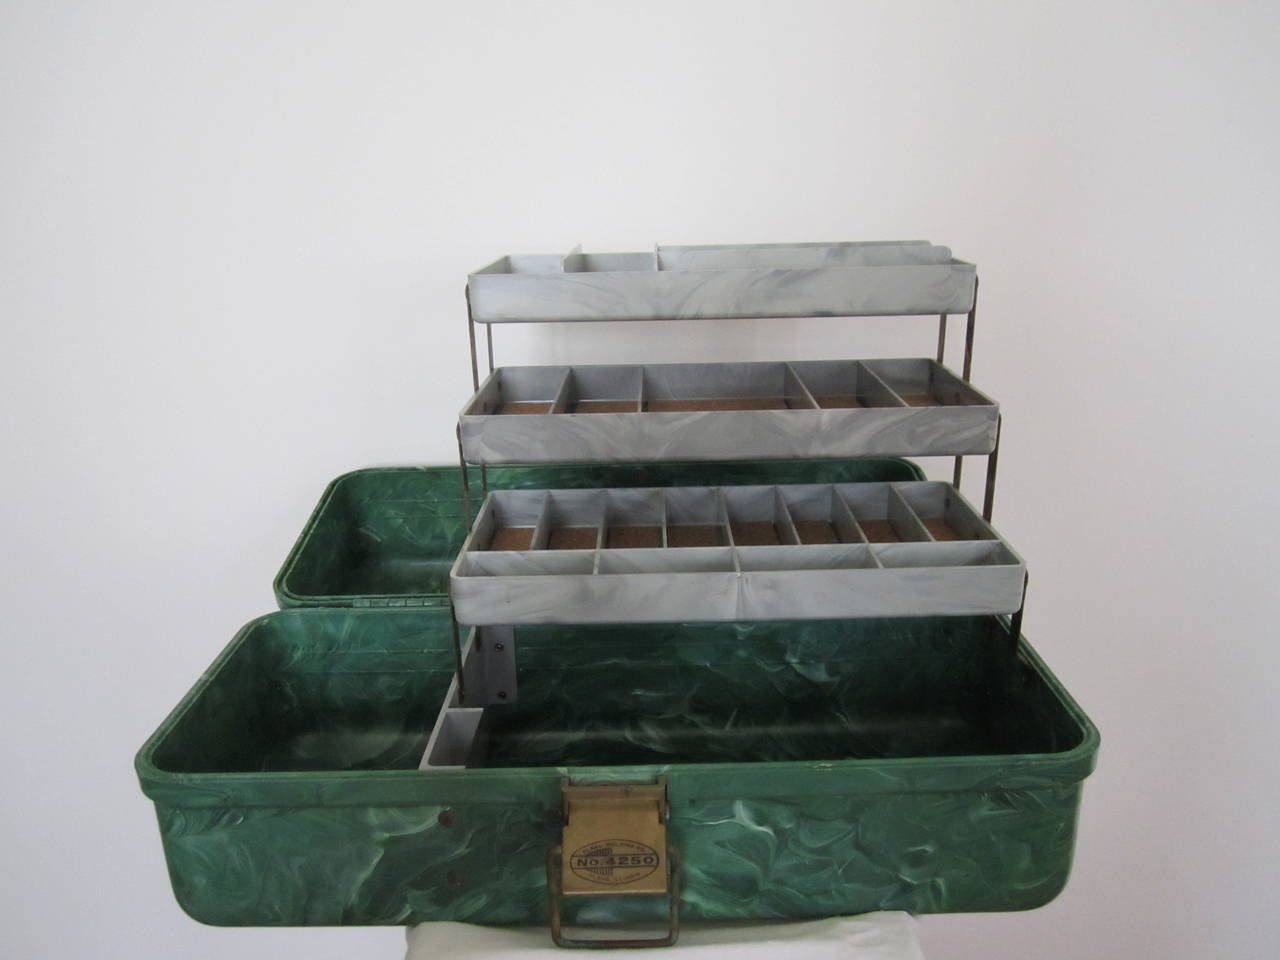 Late 20th Century Vintage Green Marbleized or Malachite Style Plastic Tackle or Storage Box